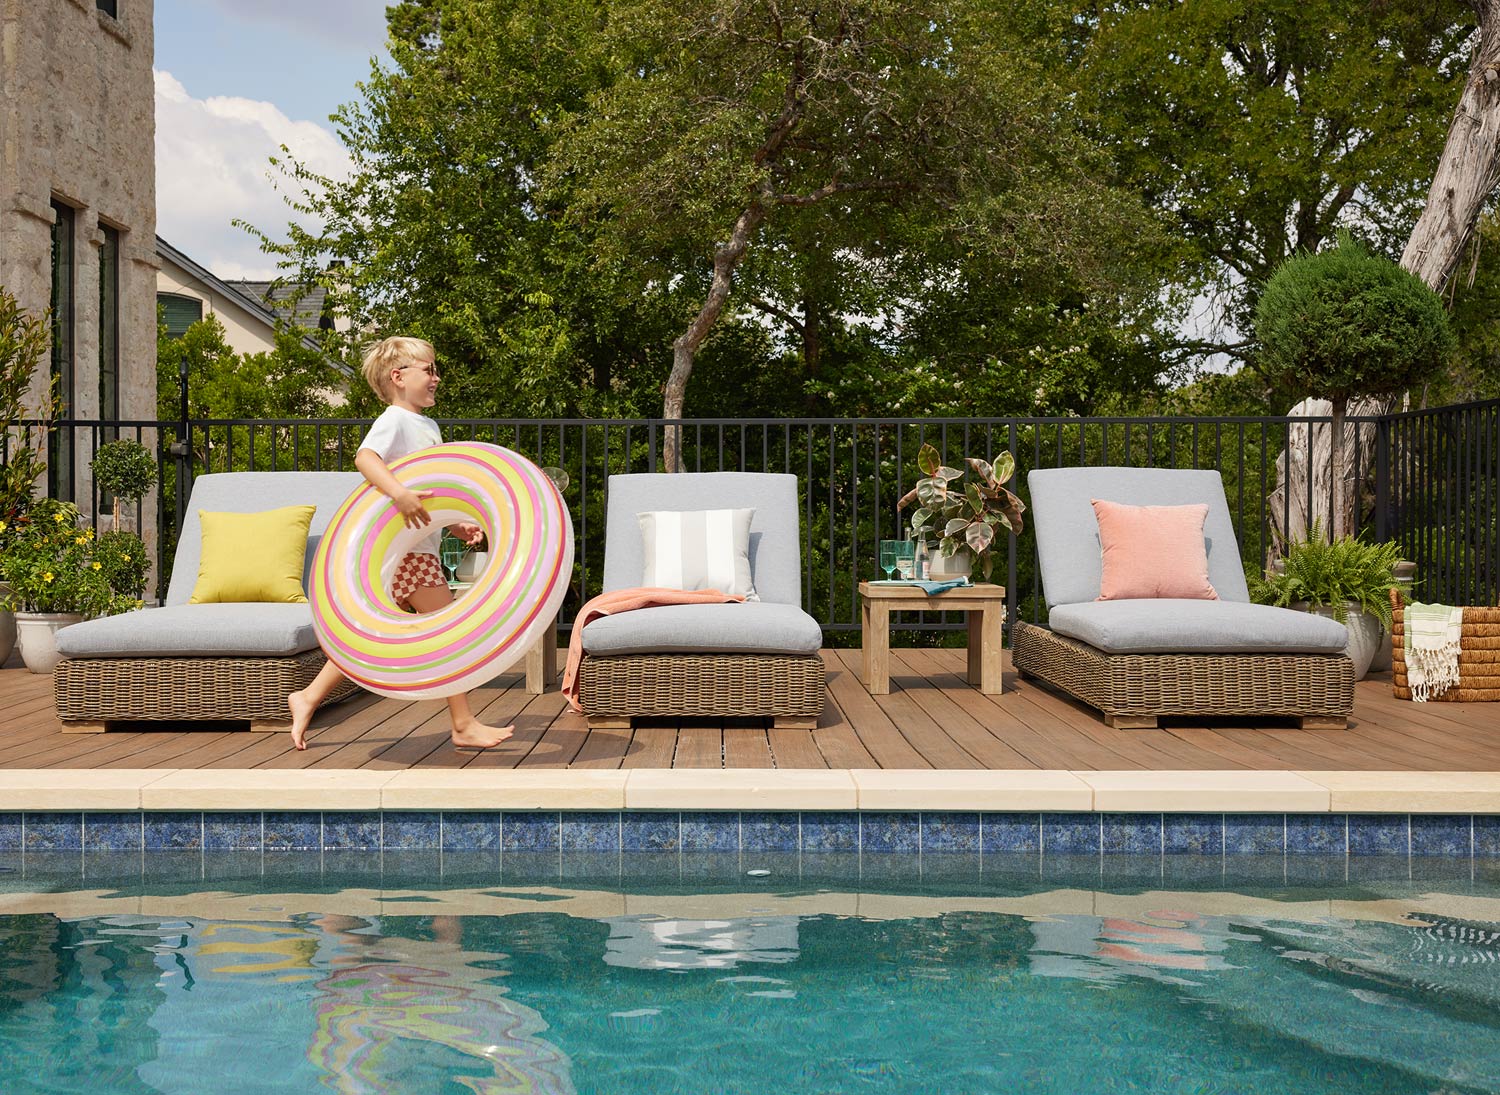 Yardbird Outdoor furniture photographed in Austin Texas by Buff Strickland